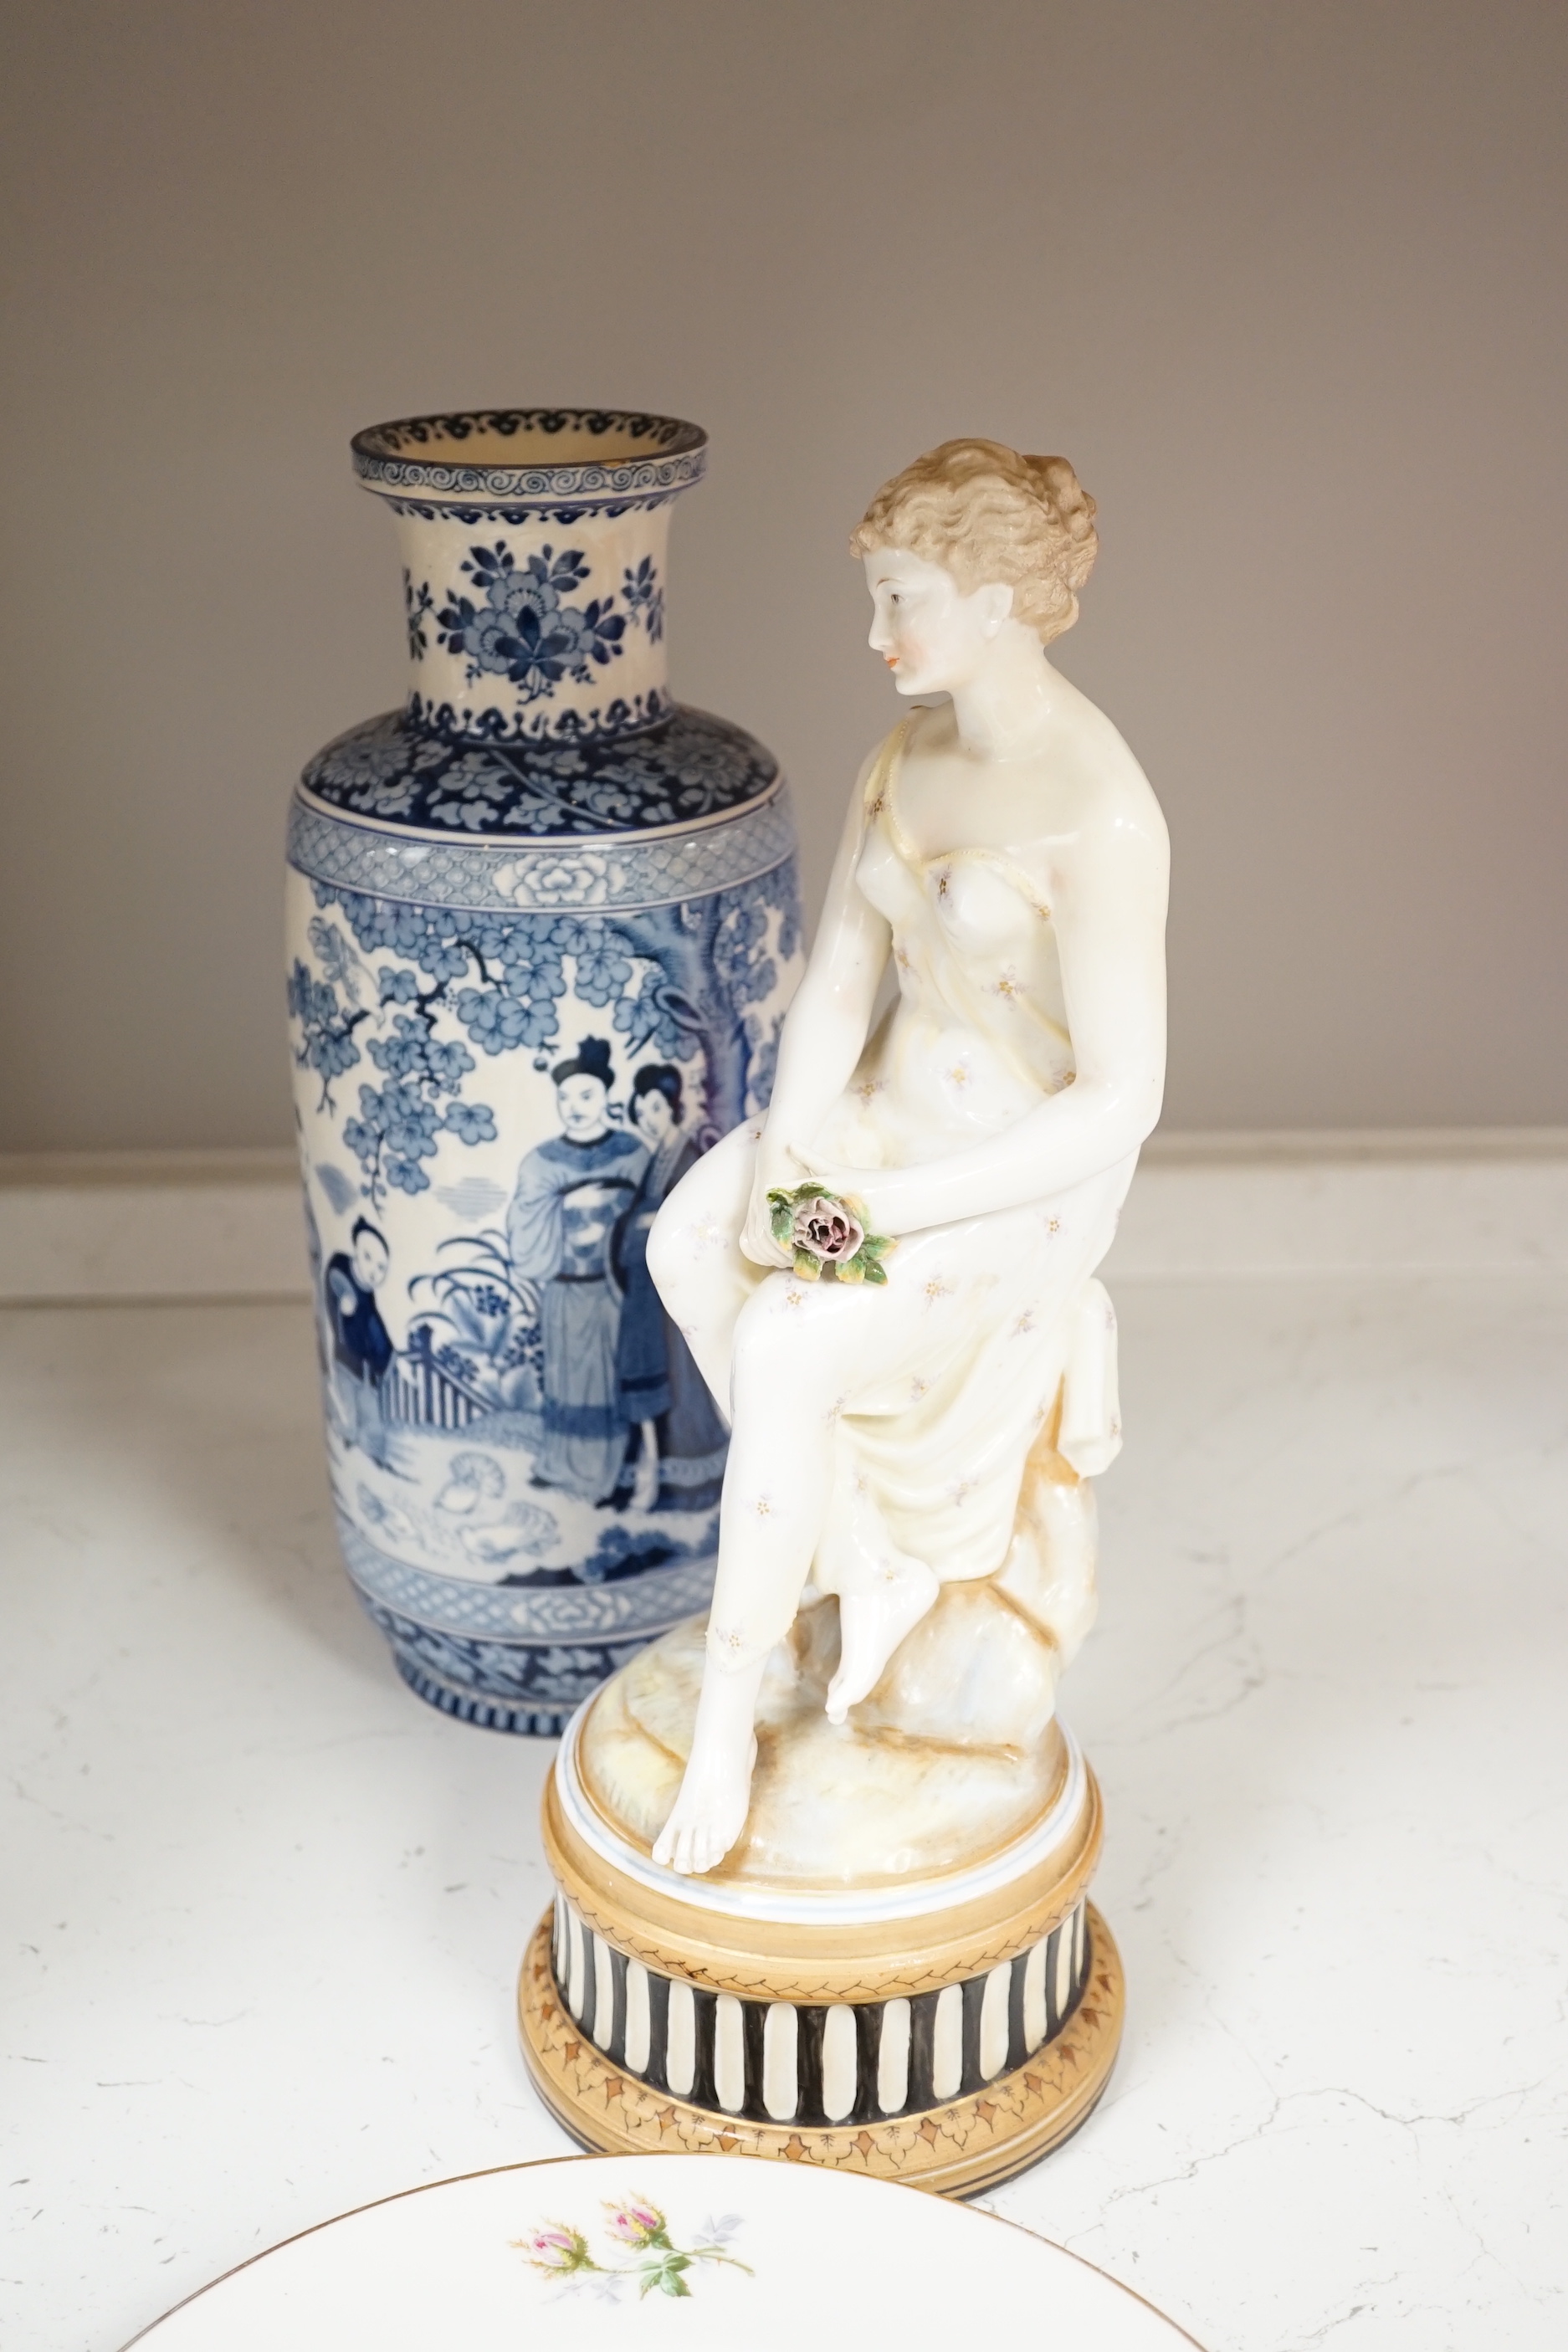 Eight porcelain items; a late 18th century Derby plate with painted scene of Coniston Lake, Lancashire, two floral painted Paris porcelain plates, a pair of Booths blue and white vases, a lidded vase, a Copeland blue gro